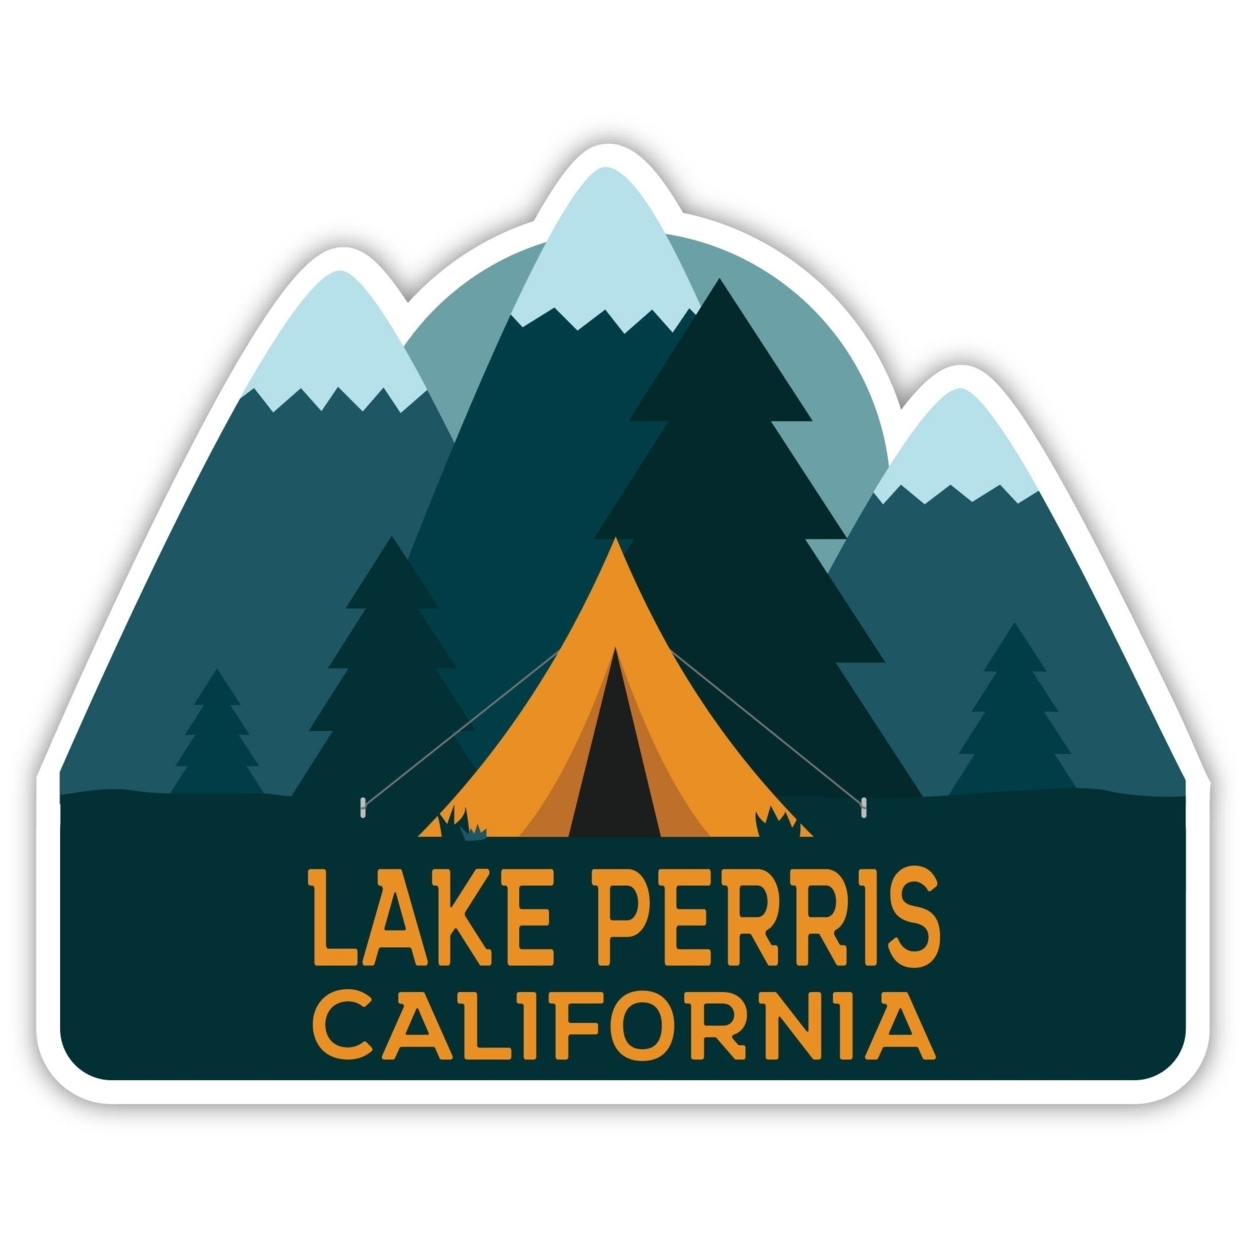 Lake Perris California Souvenir Decorative Stickers (Choose Theme And Size) - 4-Inch, Adventures Awaits